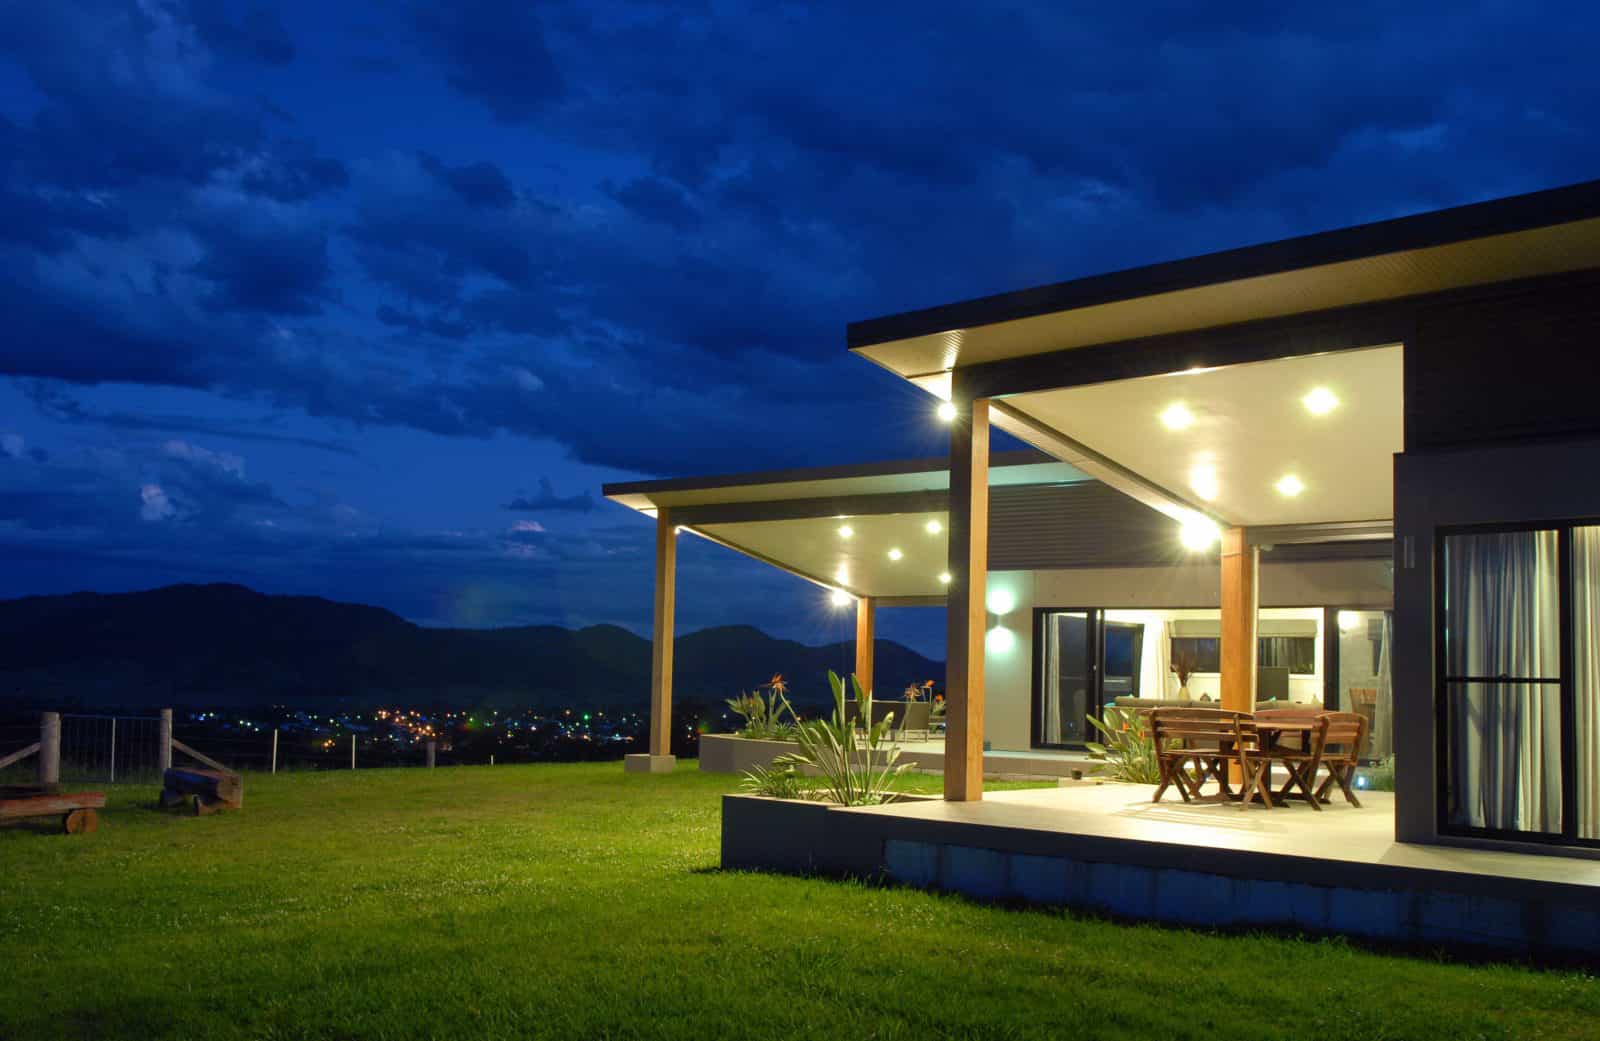 The Ridge is a luxury holiday house